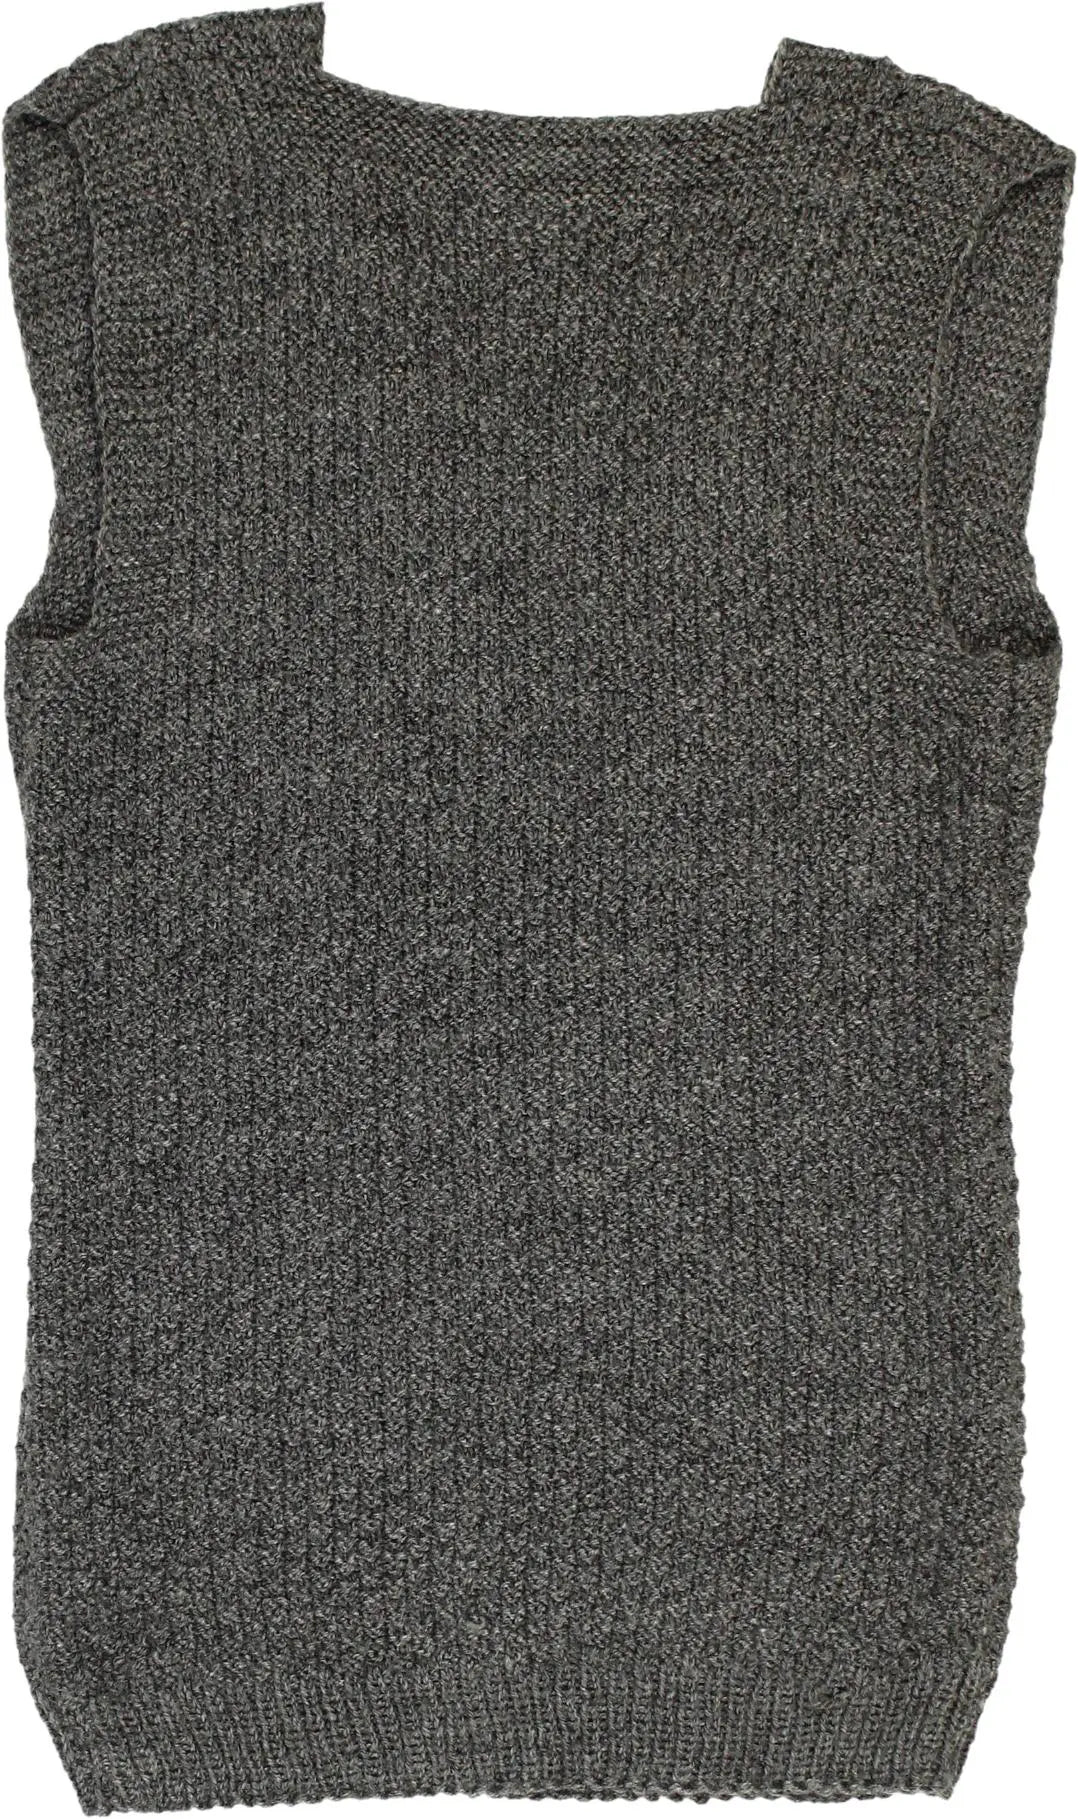 Handmade - Hand Knitted Vest- ThriftTale.com - Vintage and second handclothing